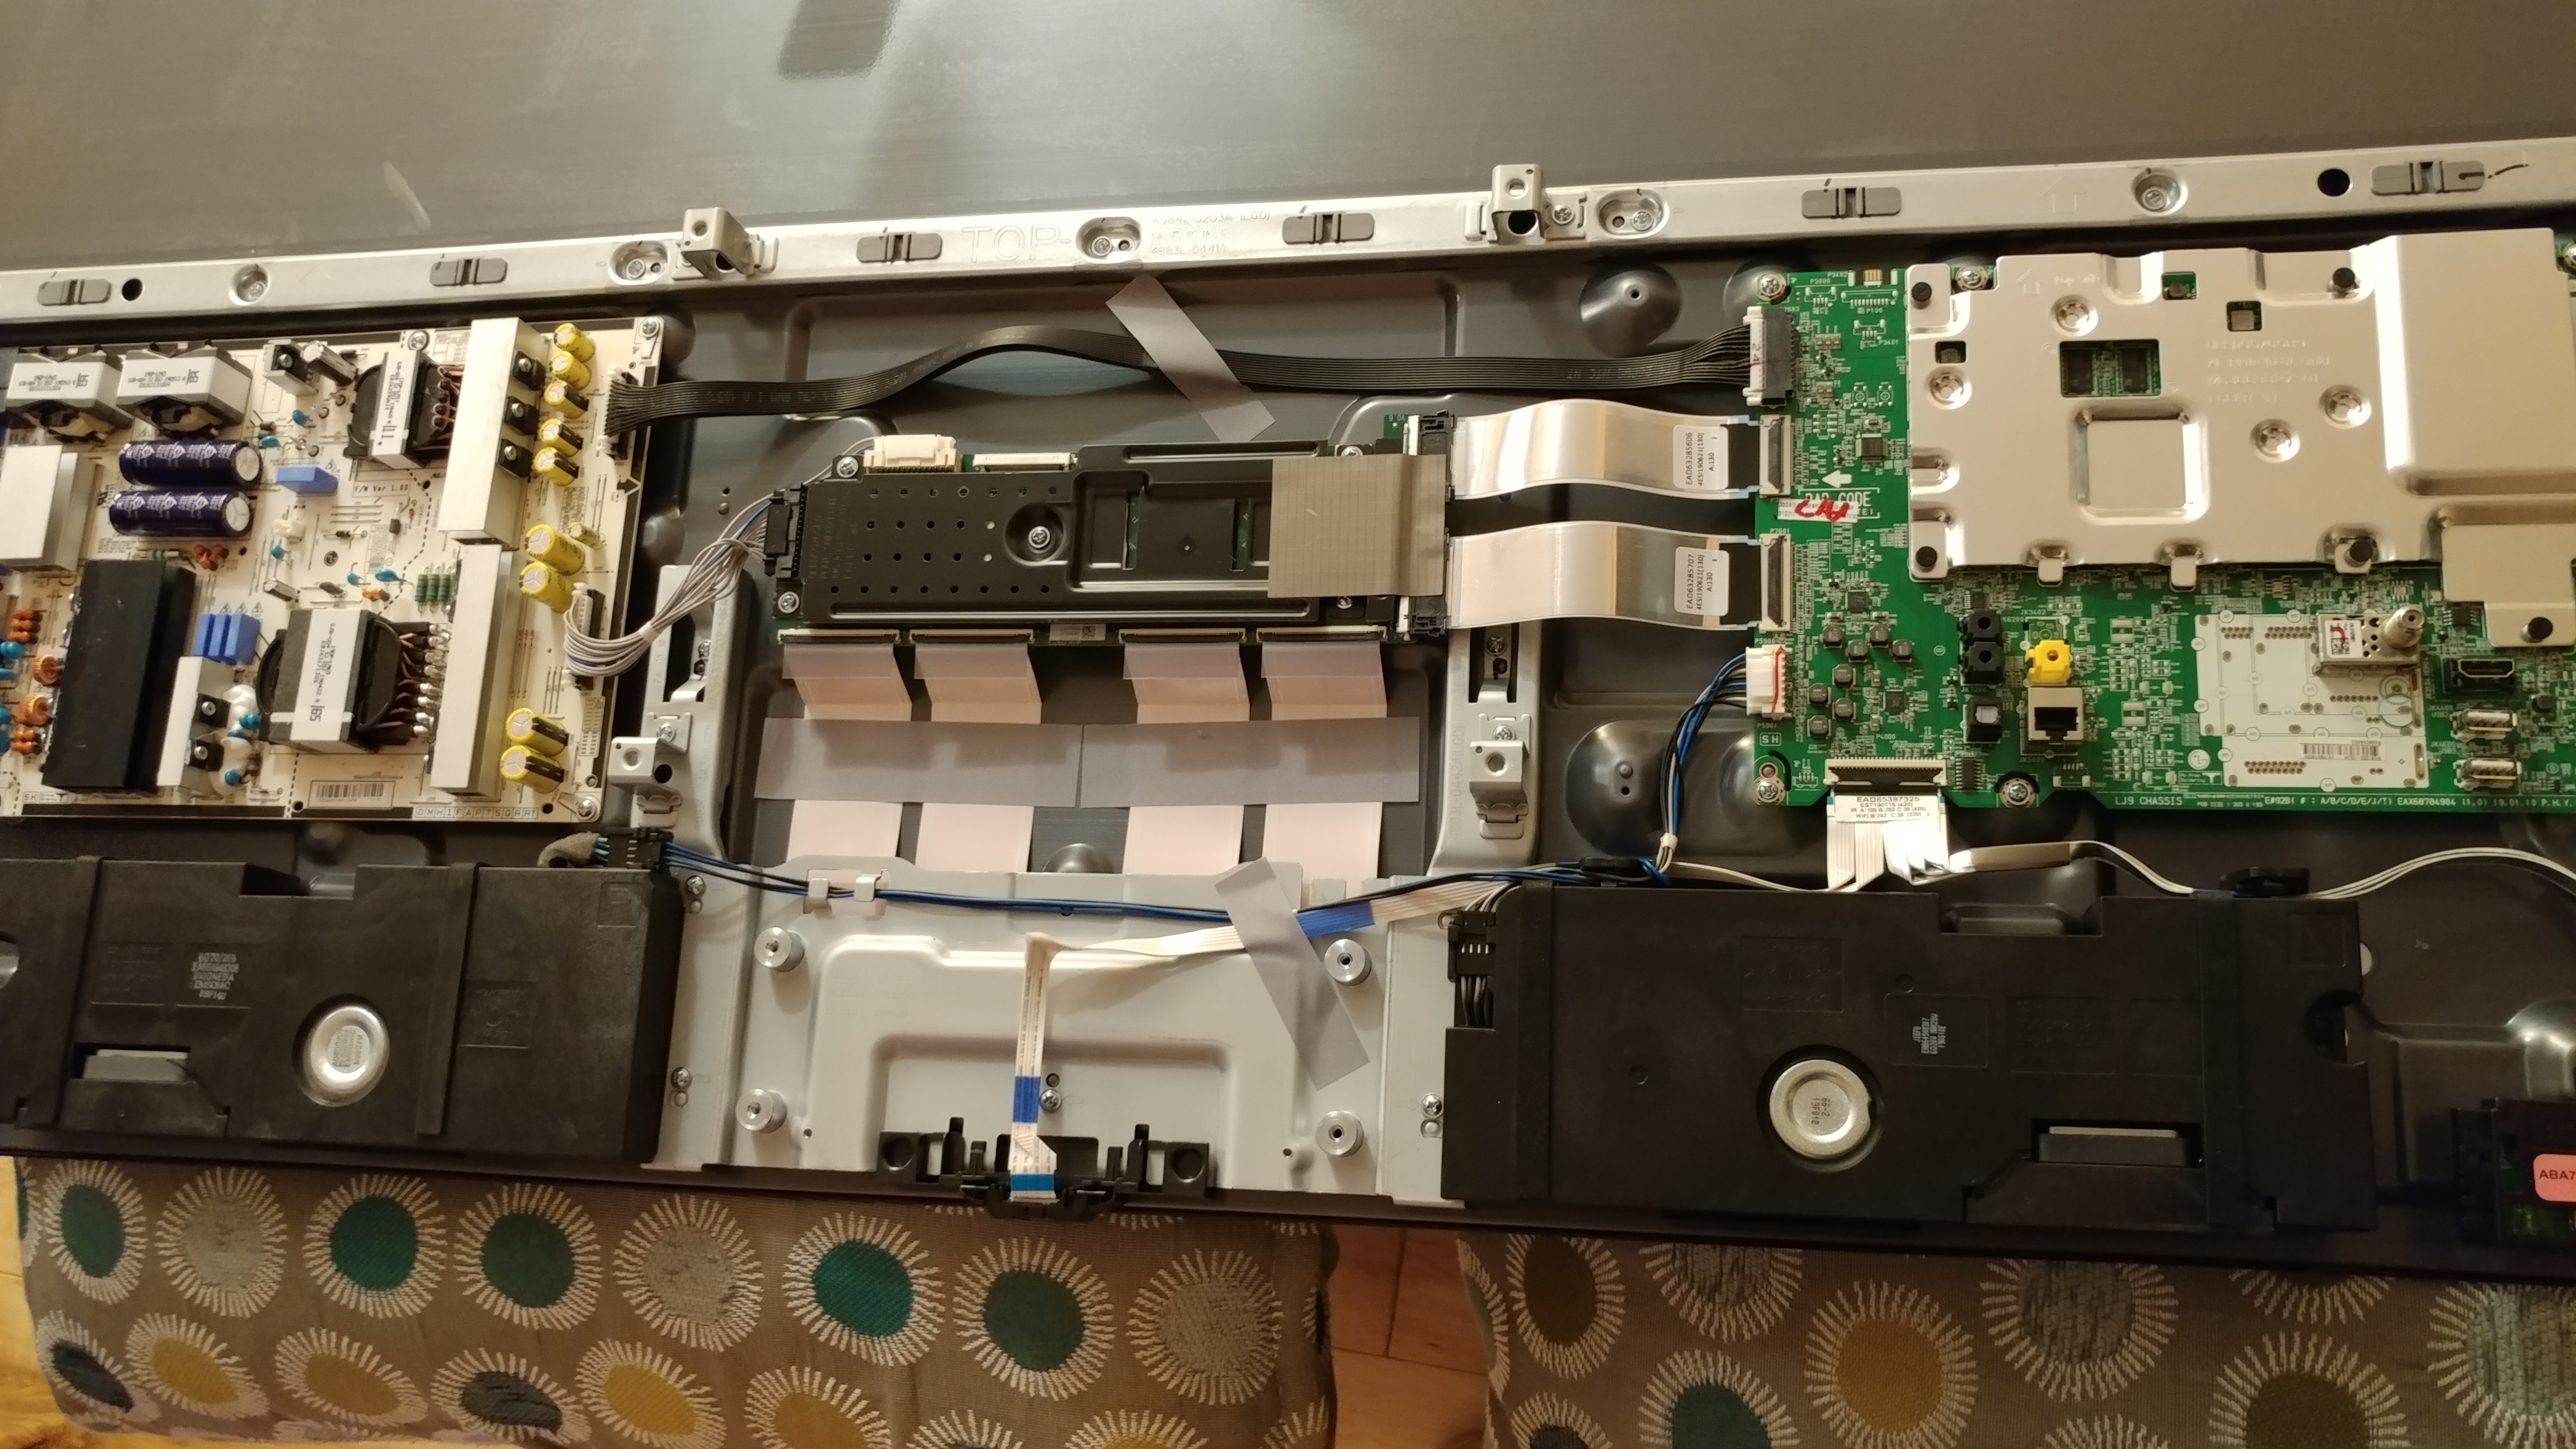 Internal components exposed